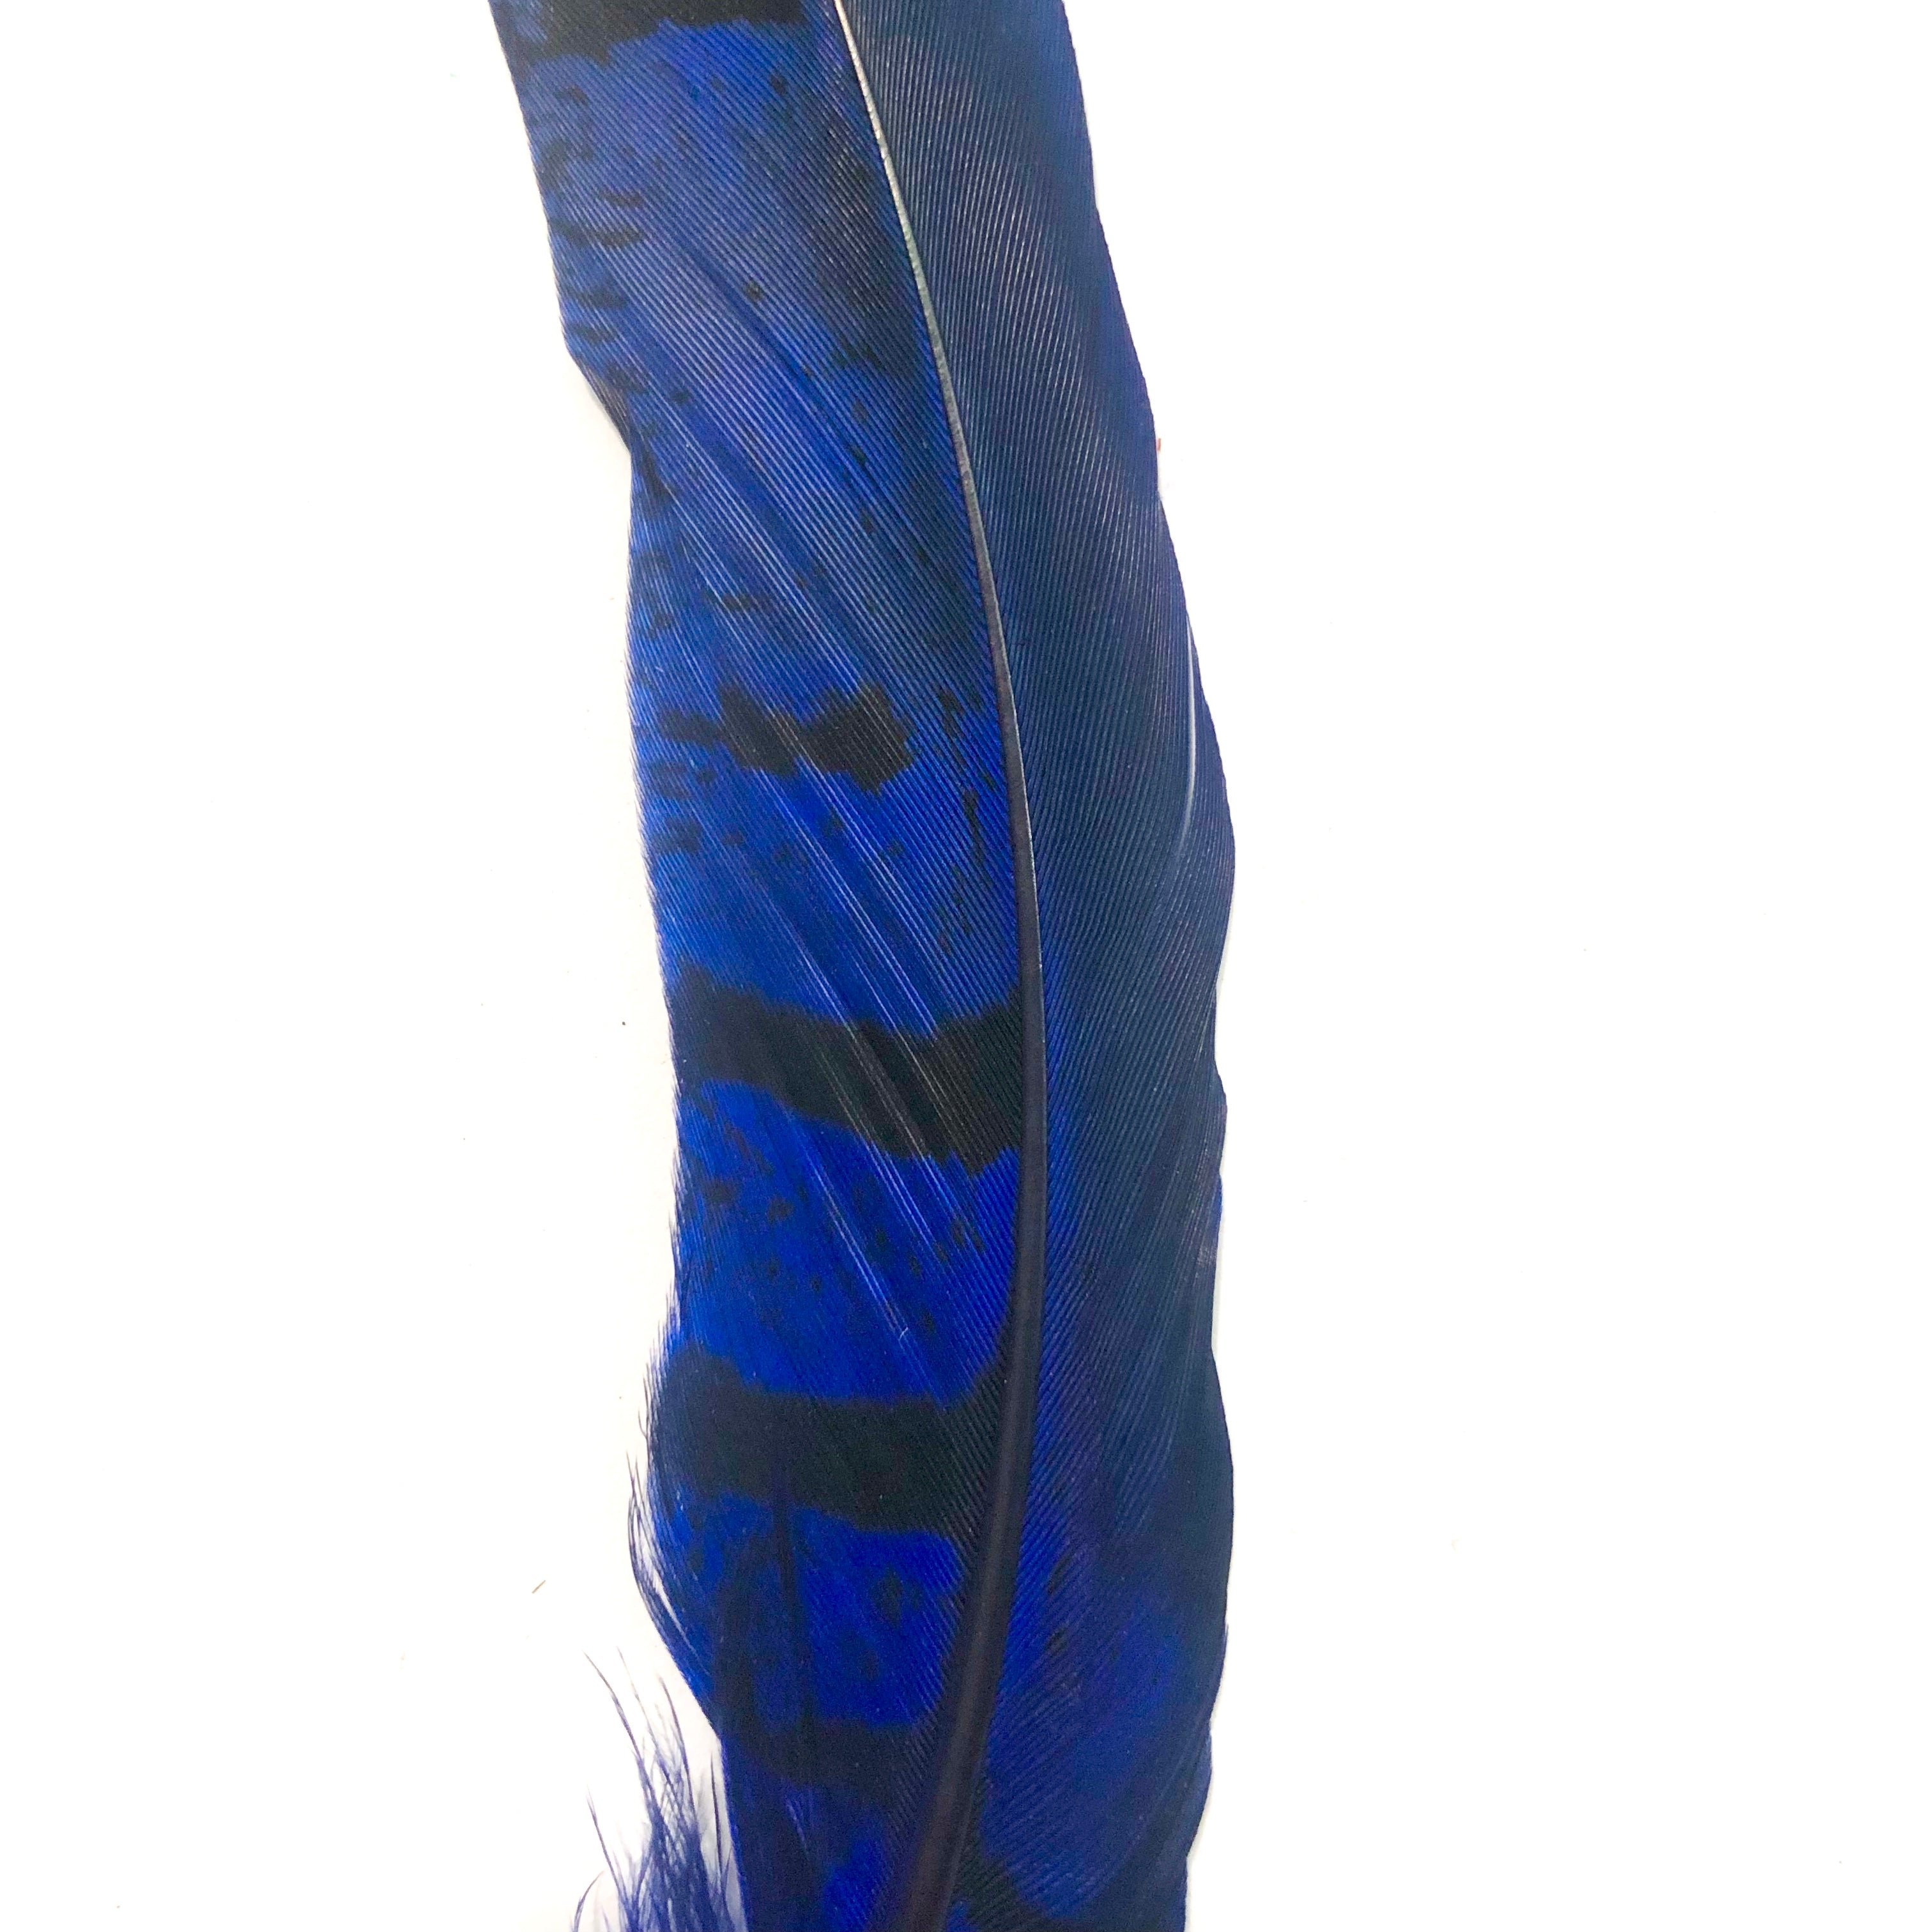 Under 6" Reeves Pheasant Tail Feather x 10 pcs - Royal Blue